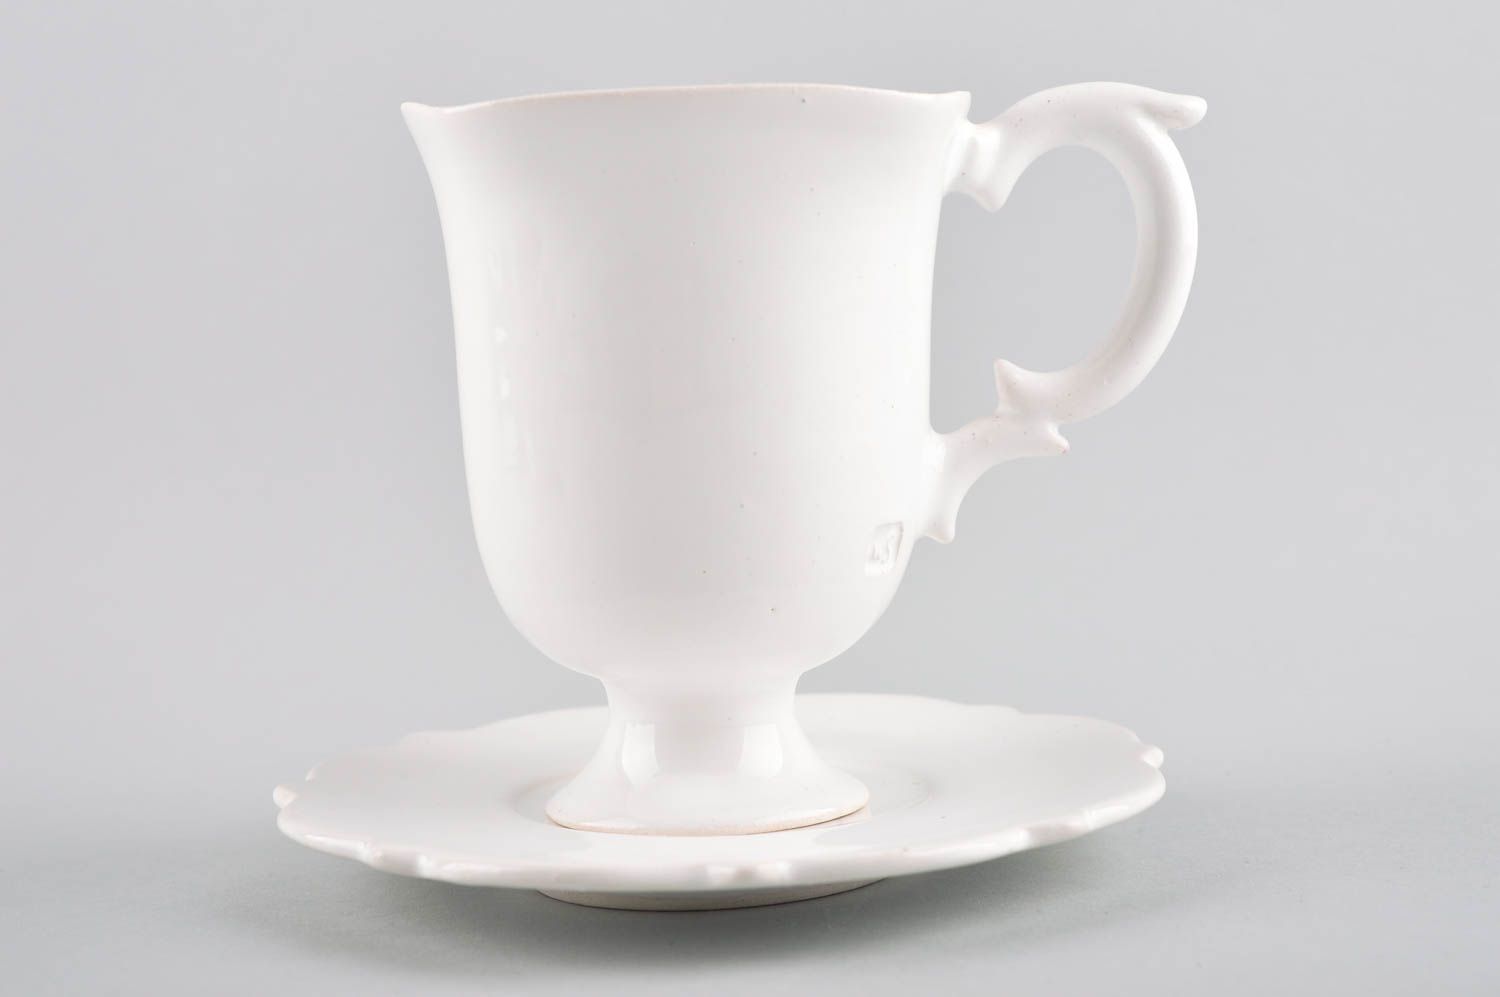 White plain porcelain teacup on the stand in elegant design with handle and saucer photo 2